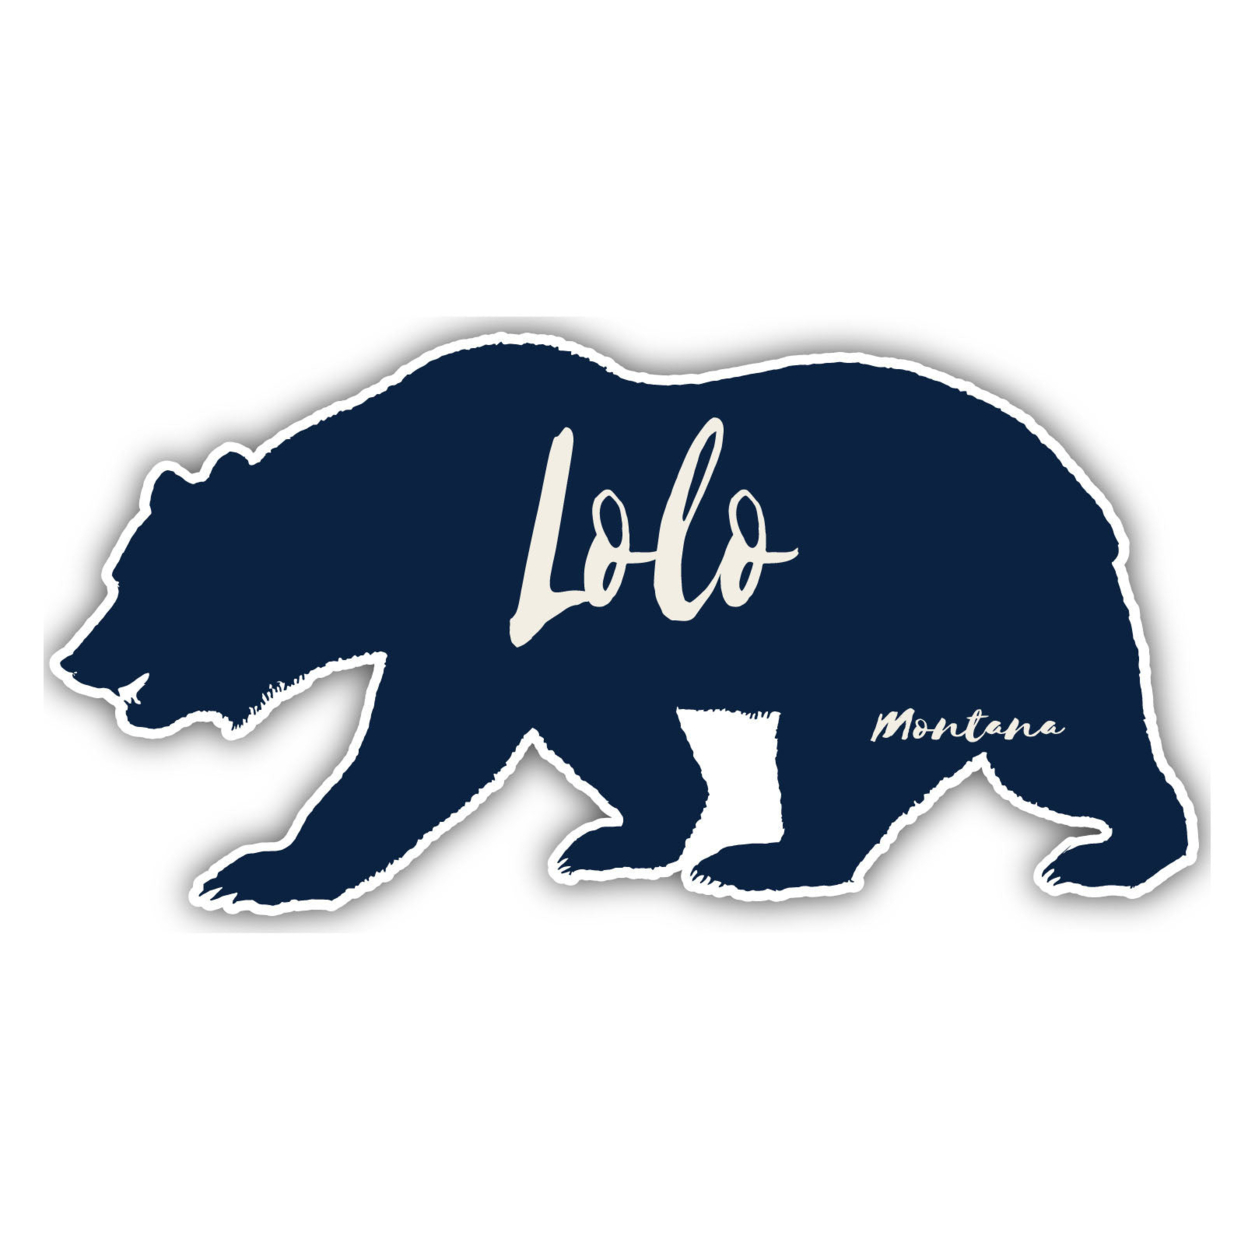 Lolo Montana Souvenir Decorative Stickers (Choose Theme And Size) - 4-Inch, Adventures Awaits